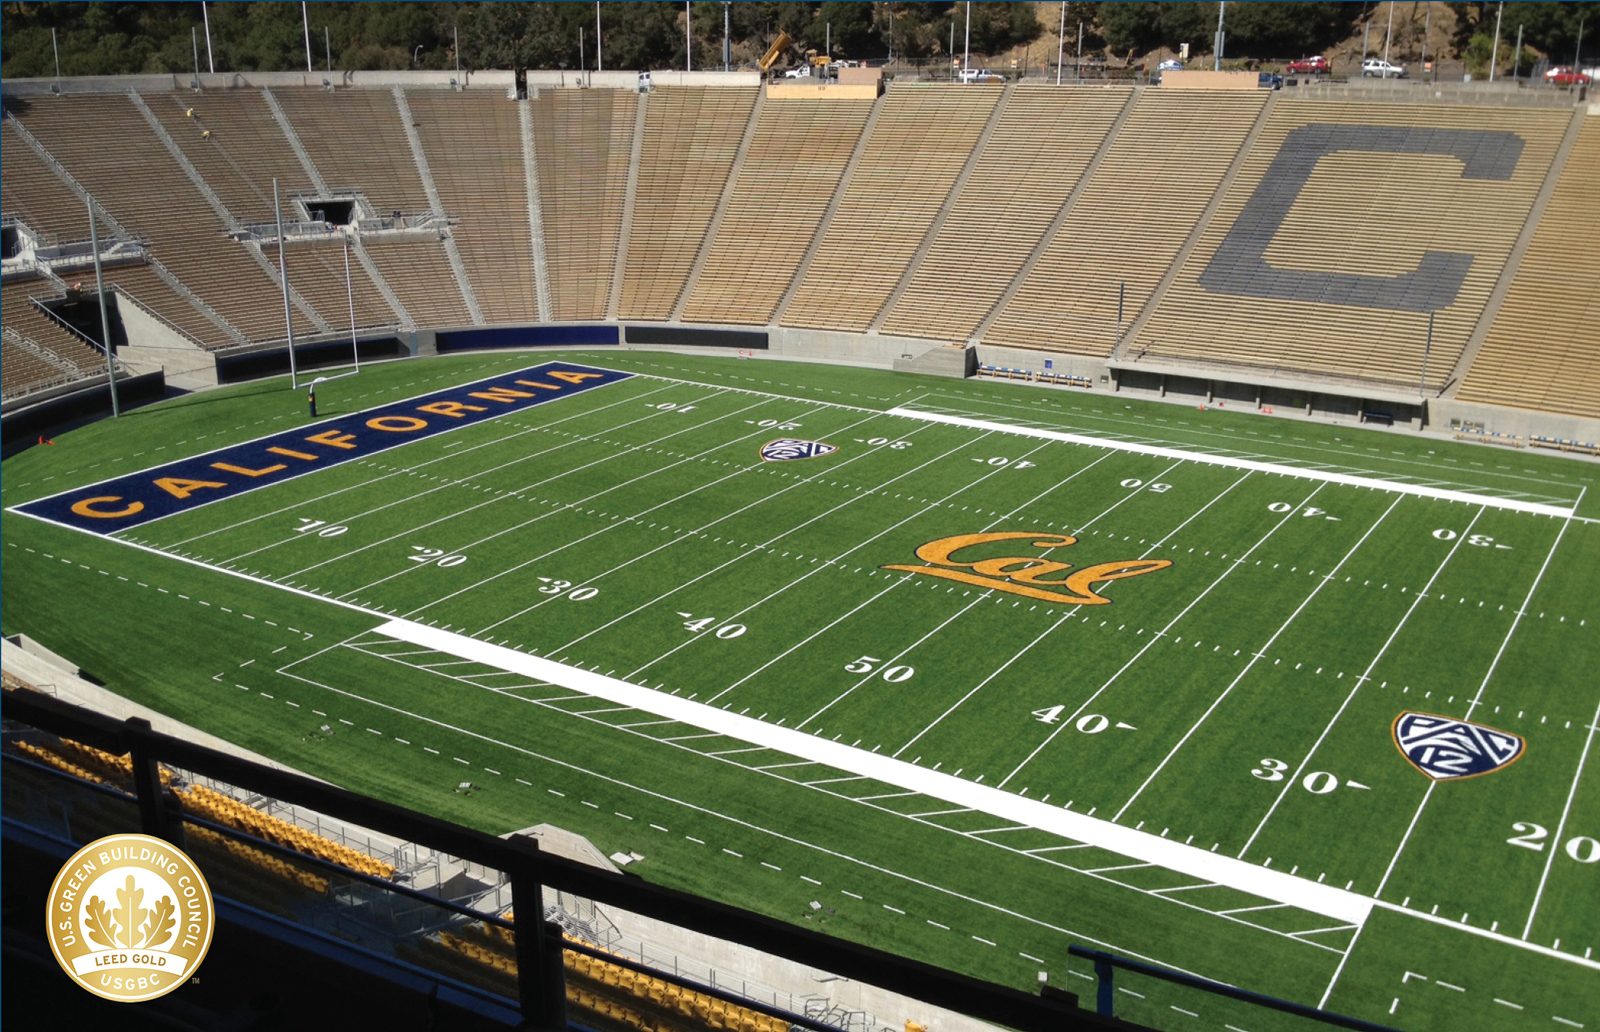 Cal-Berkeley was awarded Gold LEED certification